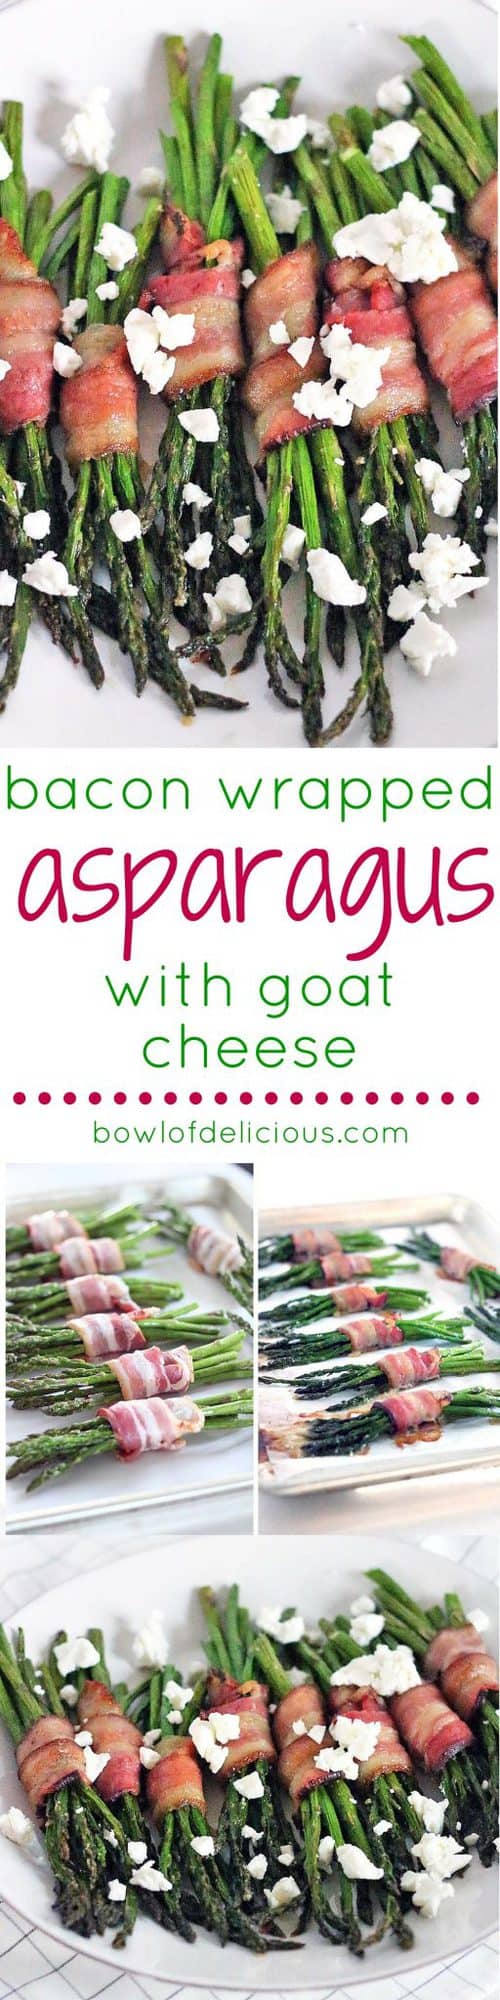 Bacon Wrapped Asparagus with Goat Cheese